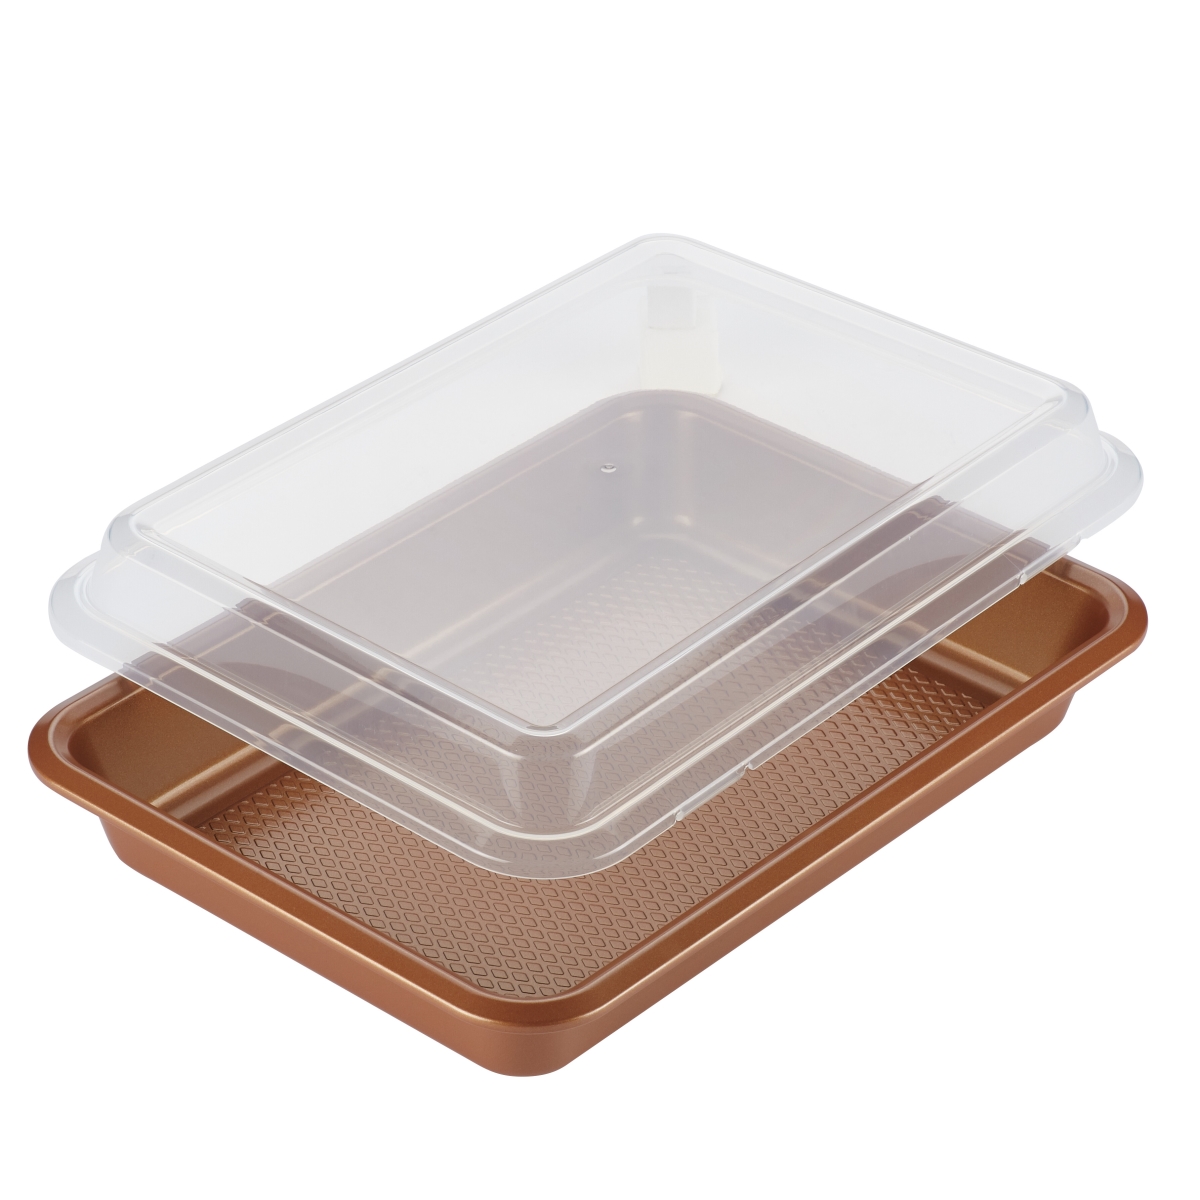 47004 Covered Cake Pan, 9 X 13 In. - Copper